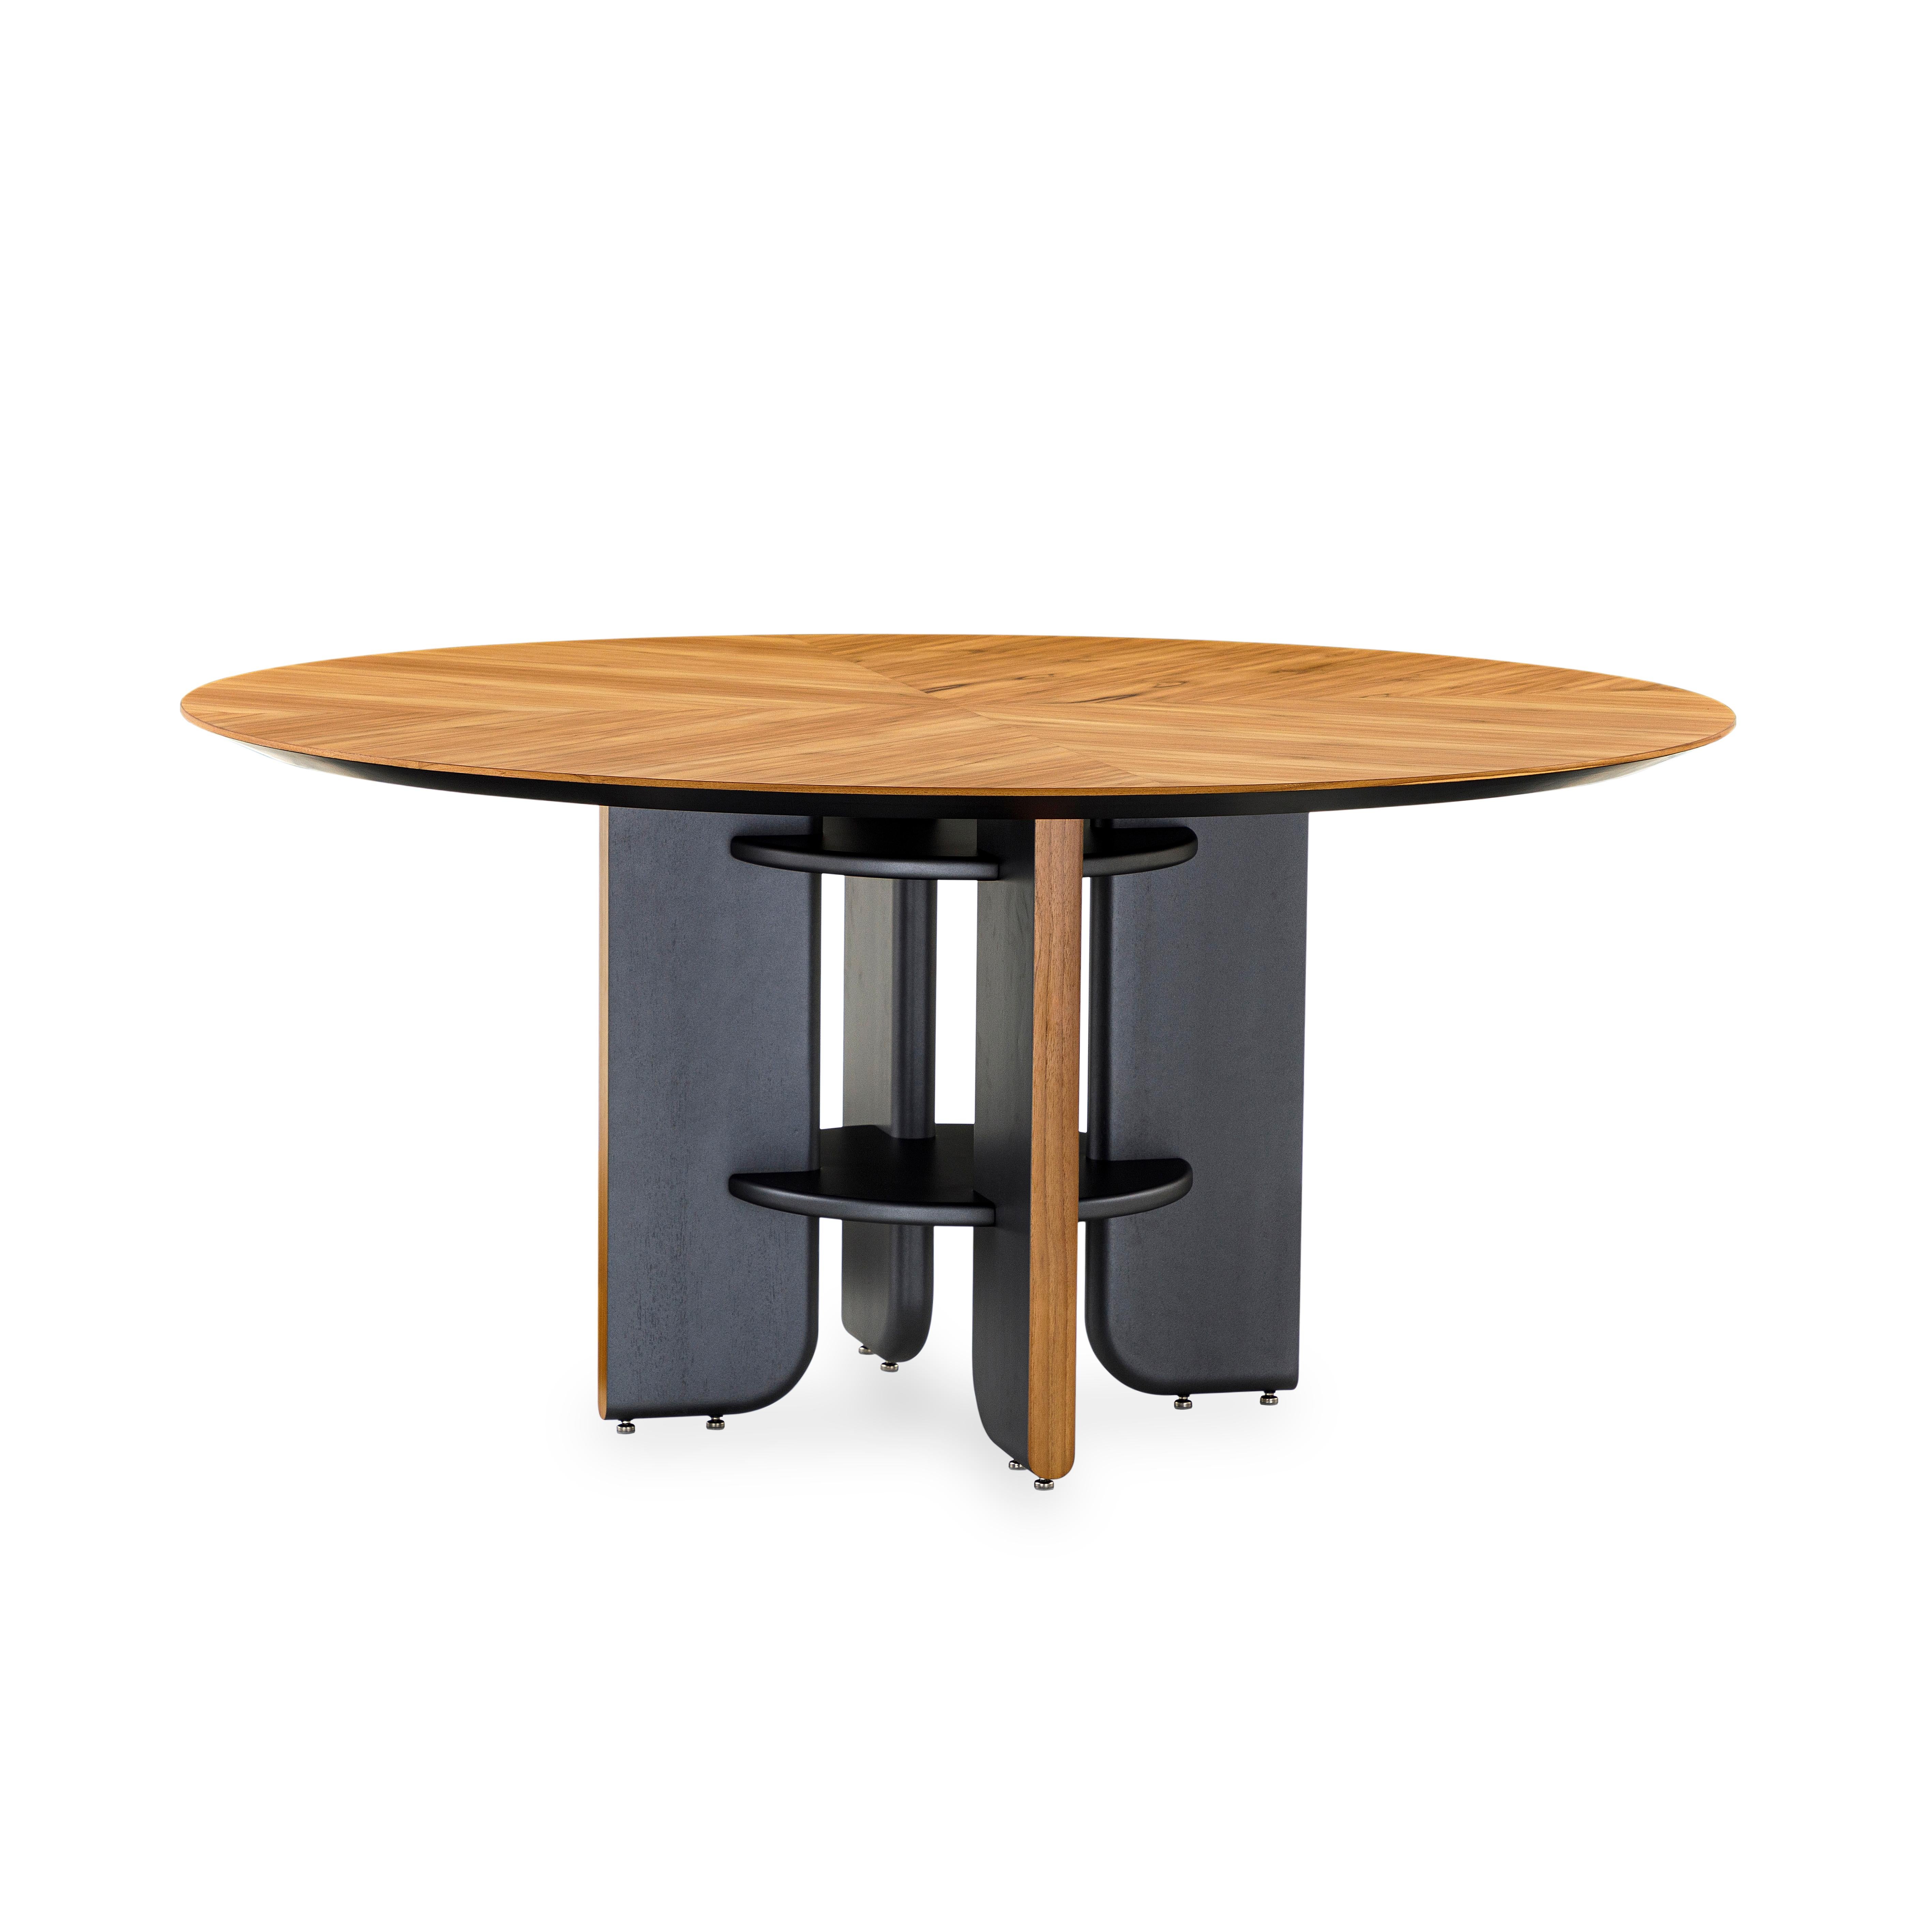 This round dining table in a teak veneered top finish with black wood legs is the perfect table for your house. Every dining space needs a good dining table and the Moon round table is going to be perfect for that space, with an exclusive design and